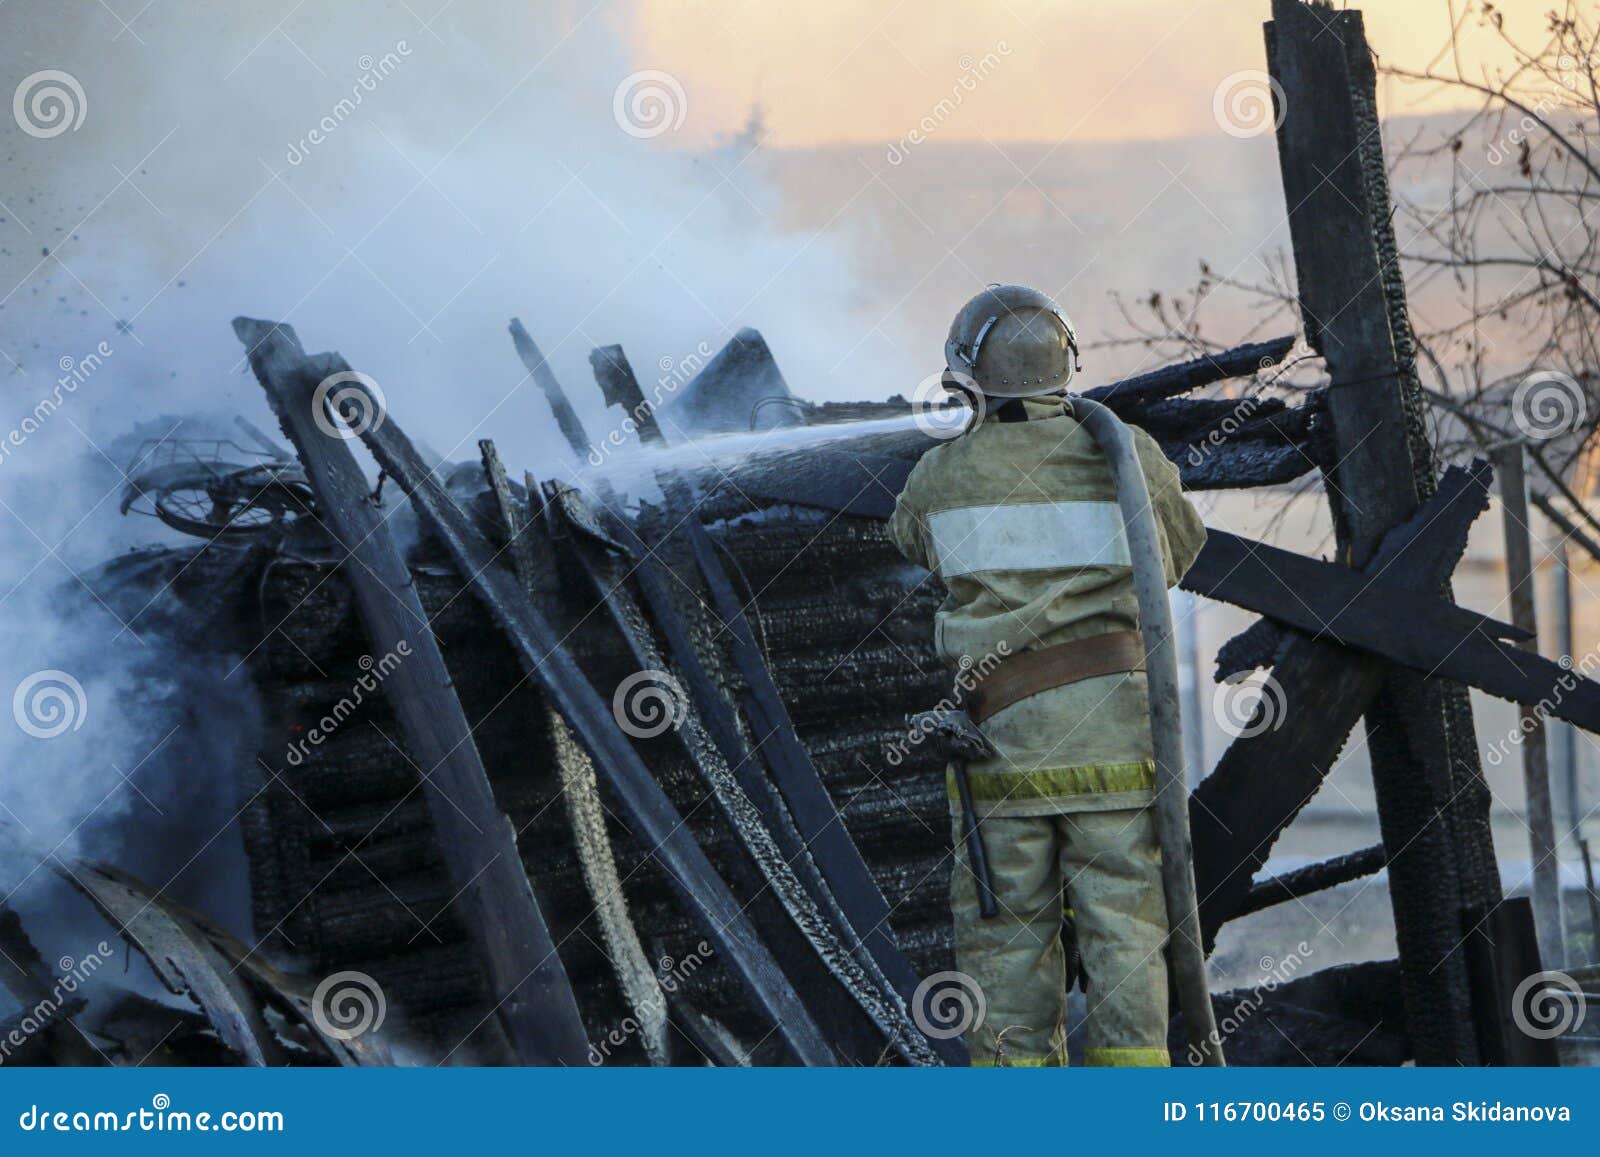 firefighter extinguishes the fire. fireman holding hose with water, watering strong stream of burning wooden structure in smoke.